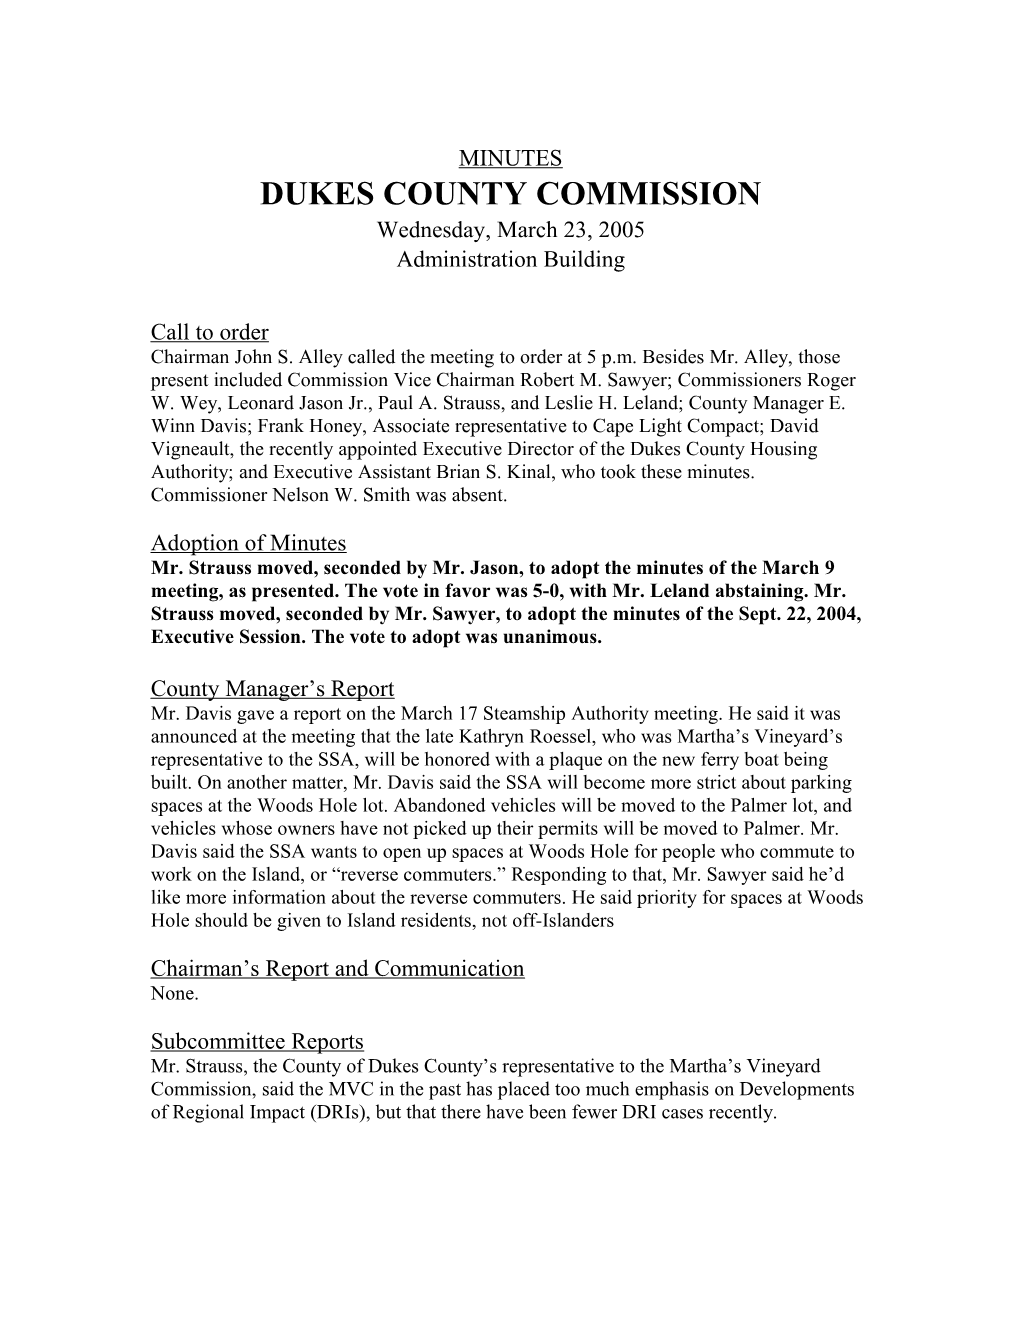 Dukes County Commissioners